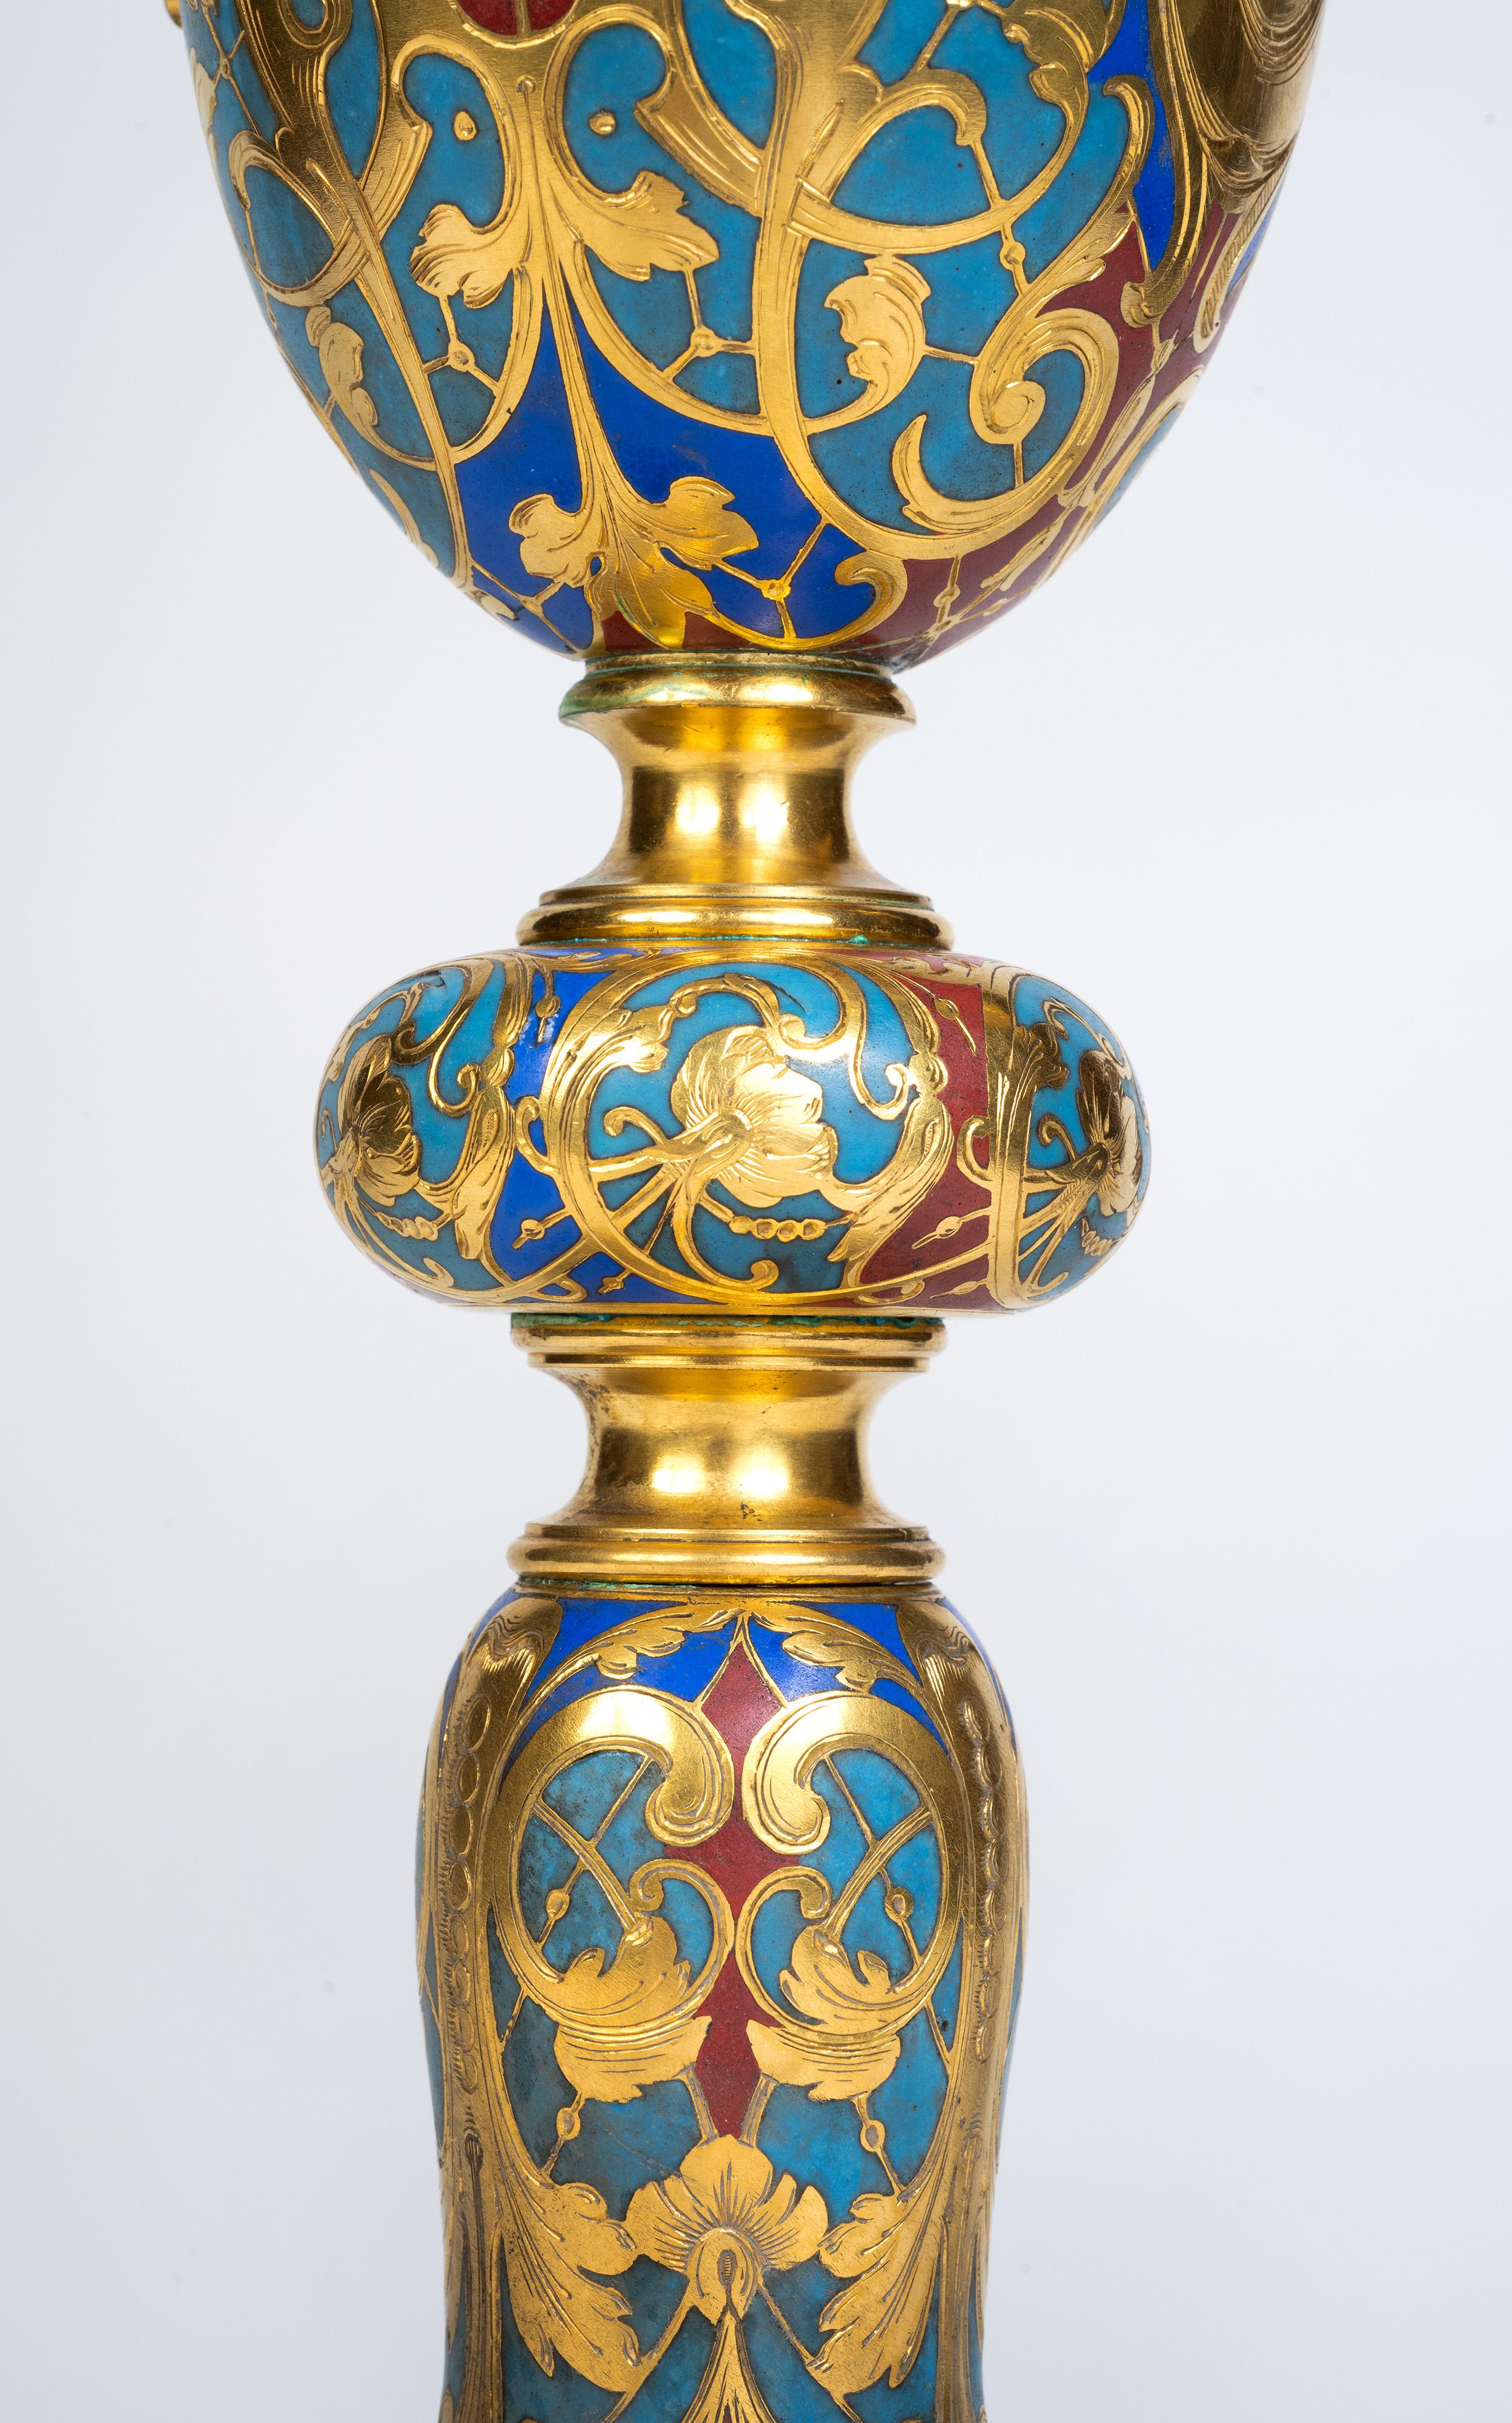 An Exceptional Pair of Champleve Enamel Ormolu Candelabra by Sevin & Barbedienne For Sale 11